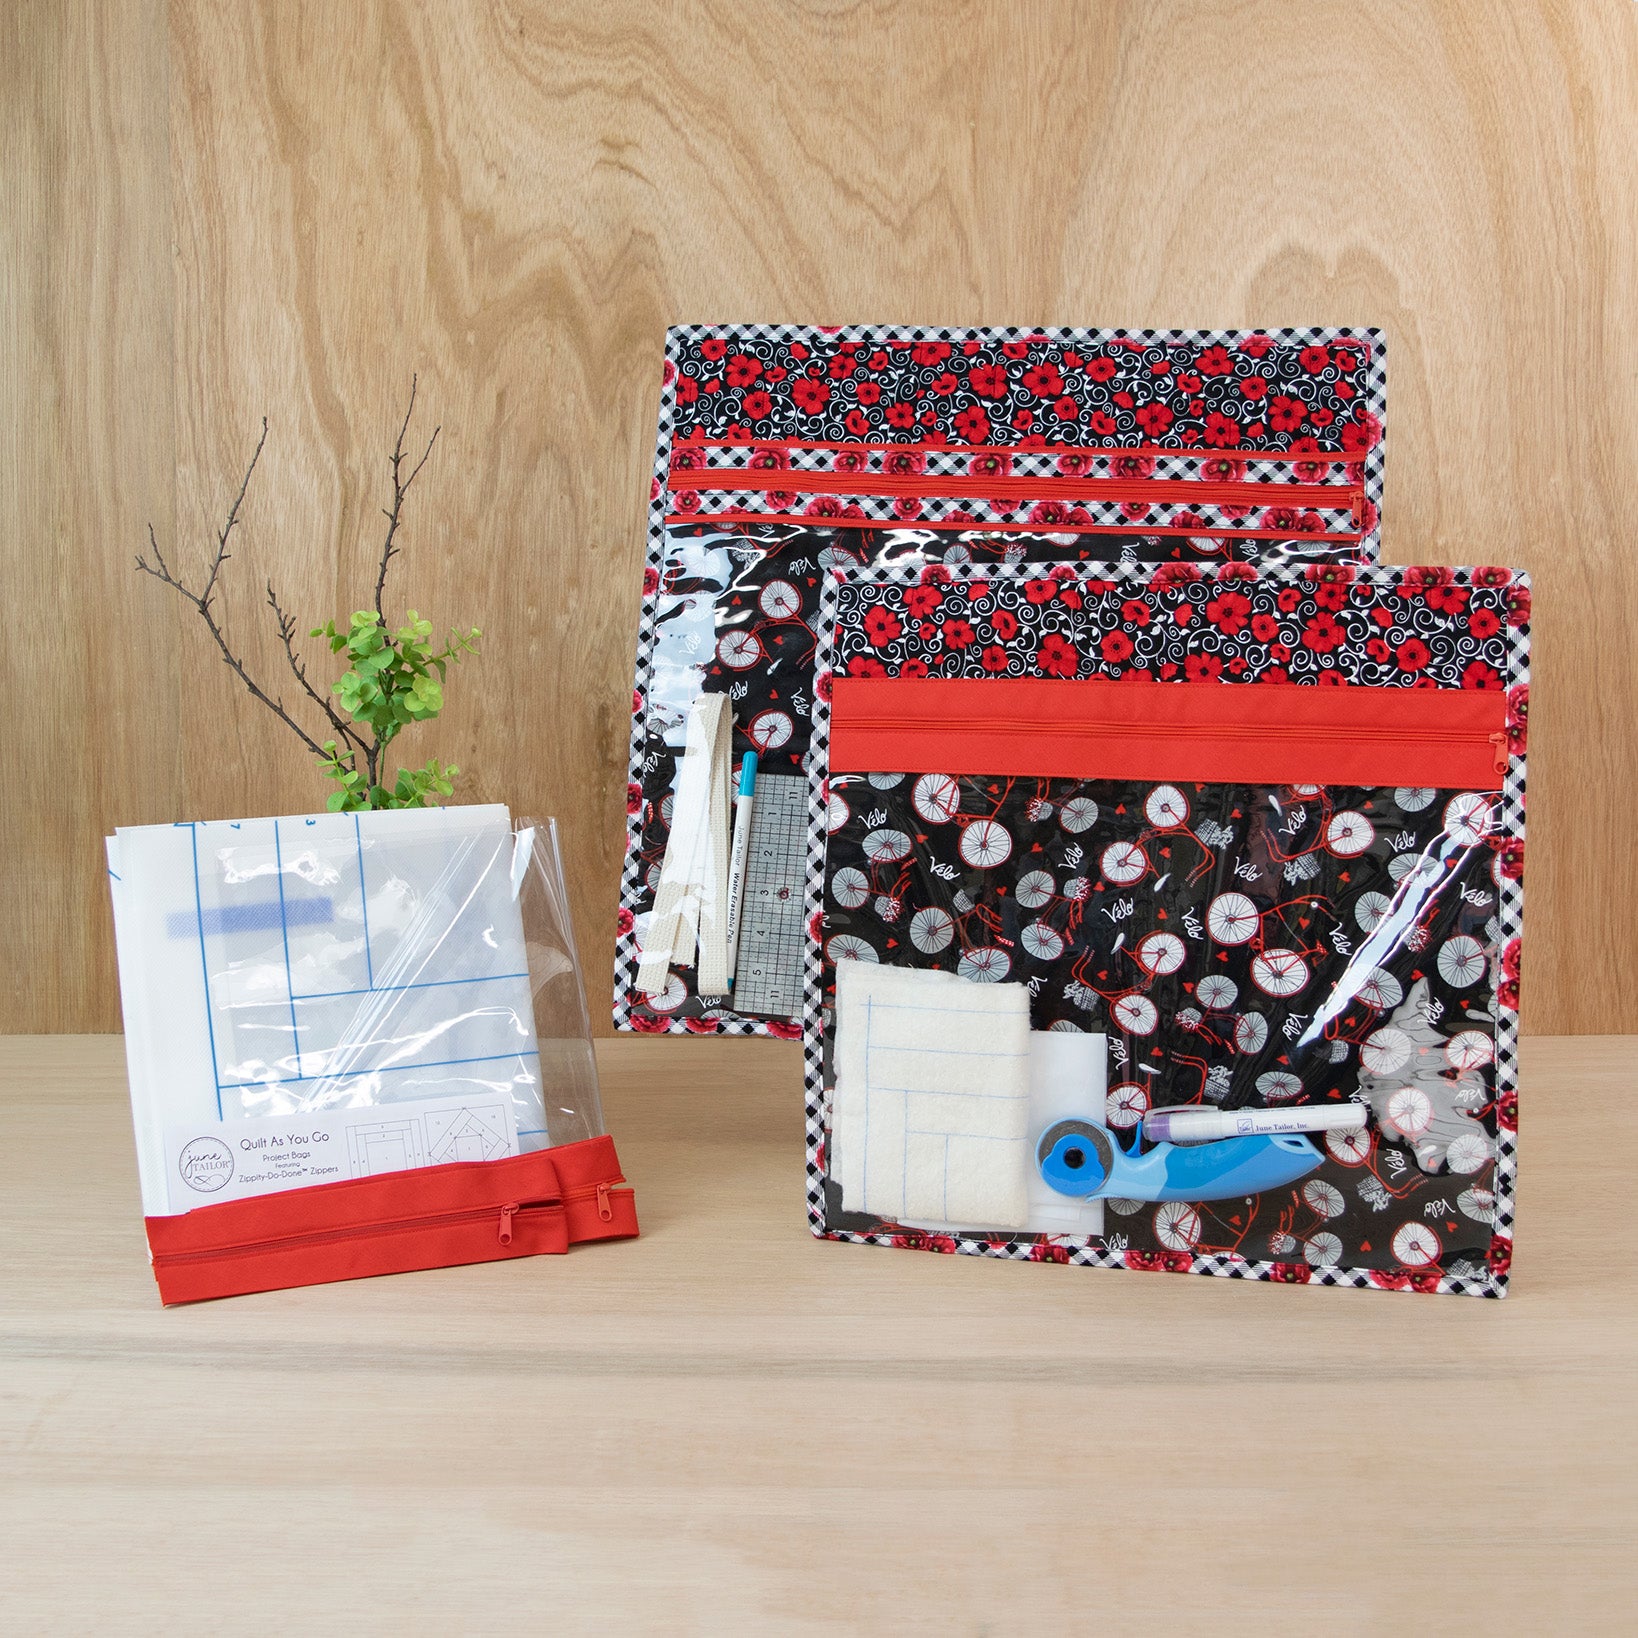 2023 June Tailor Collection-Project Bag Kit (2) -Zippity-Do-Done™ Red-Kits with Zippity-Do-Done™